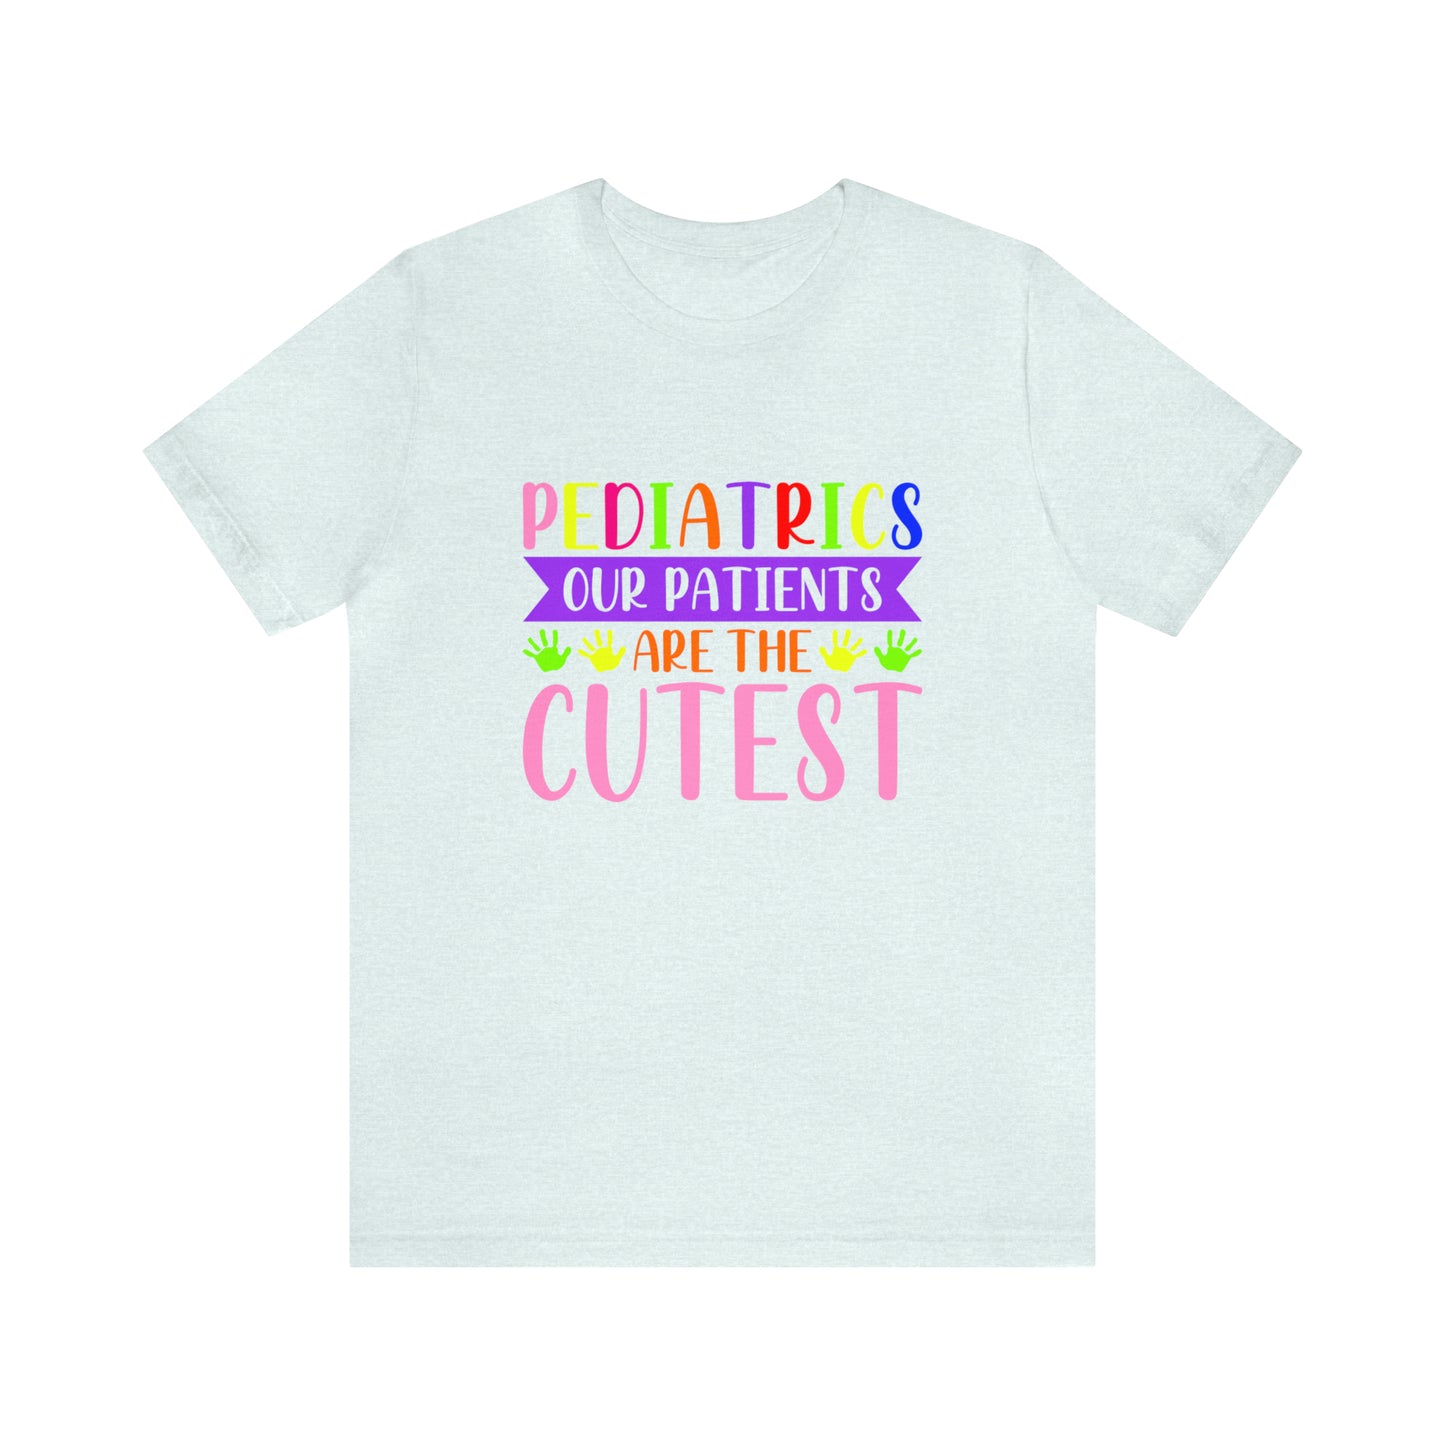 Pediatric Our patients are the cutest  Short Sleeve Tee